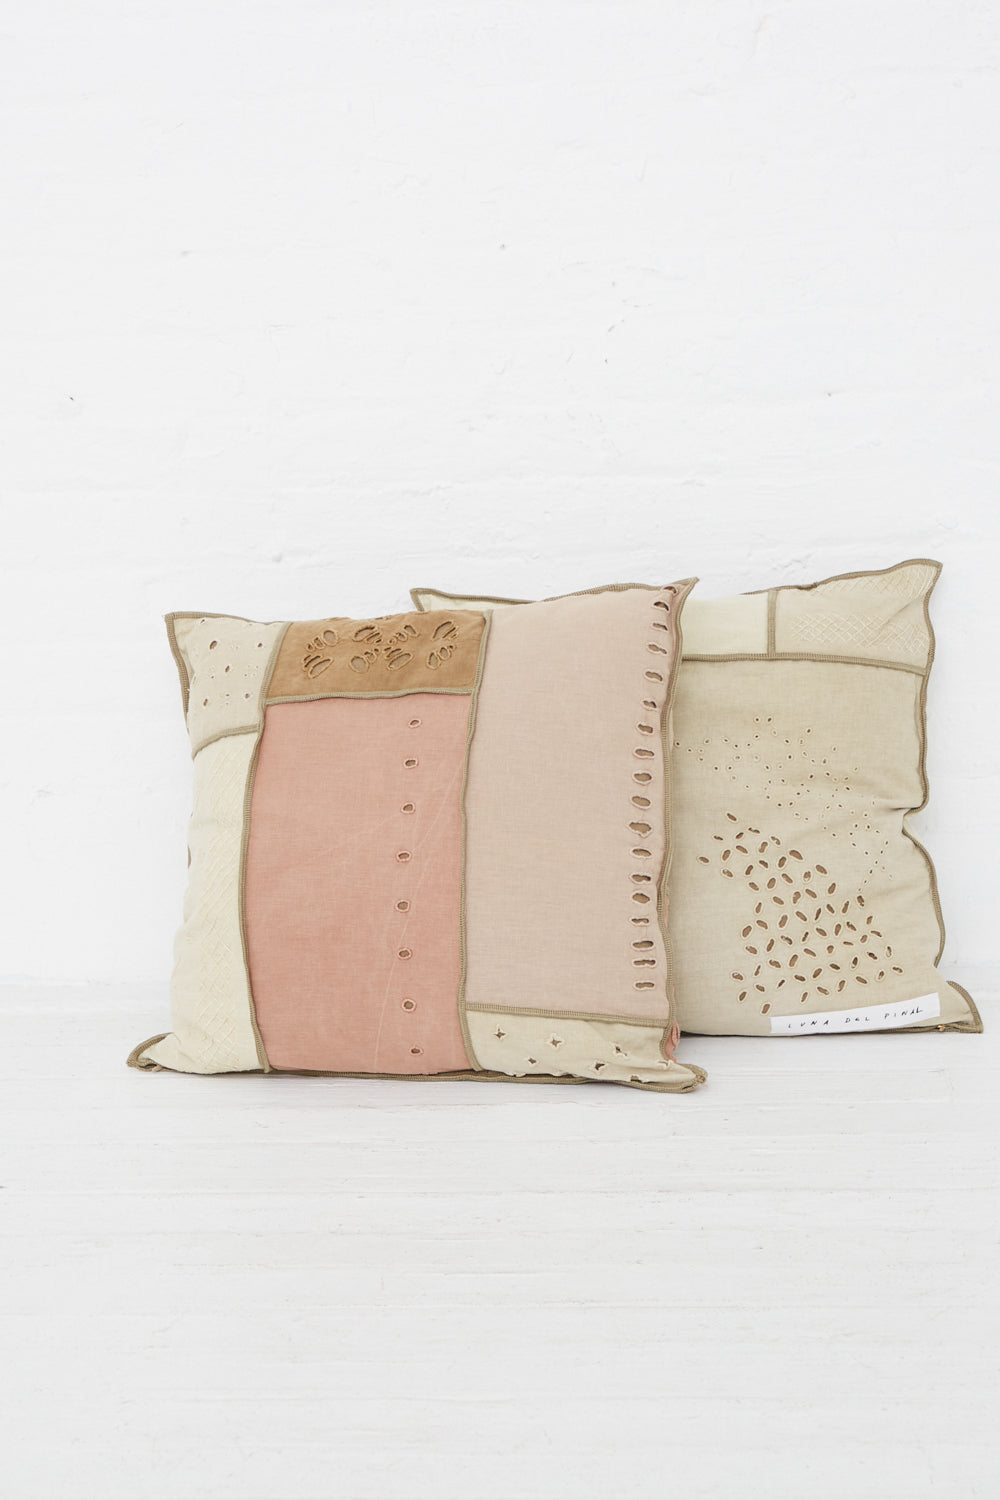 Luna Del Pinal - Natural Hand-Dyed Triple Embroidered Cushion in Tortilla